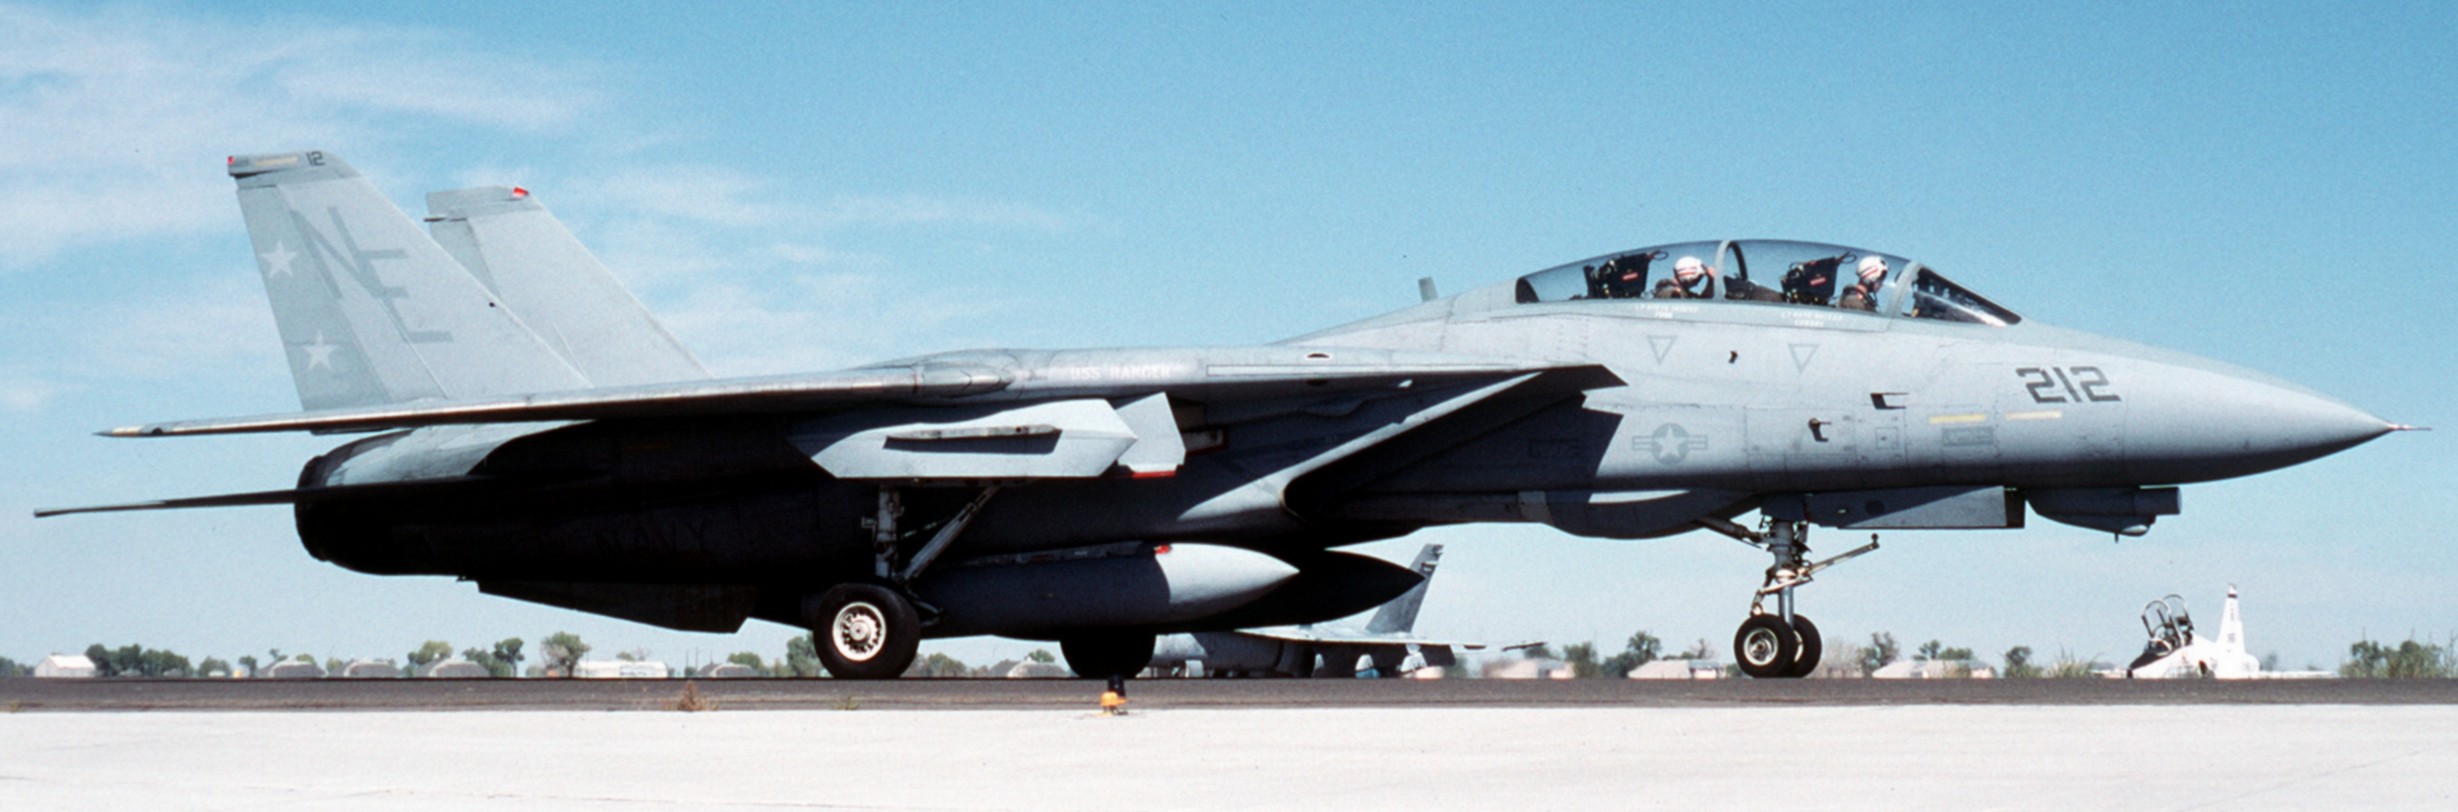 vf-2 bounty hunters fighter squadron fitron f-14a tomcat carrier air wing cvw-2 nas fallon nevada 11